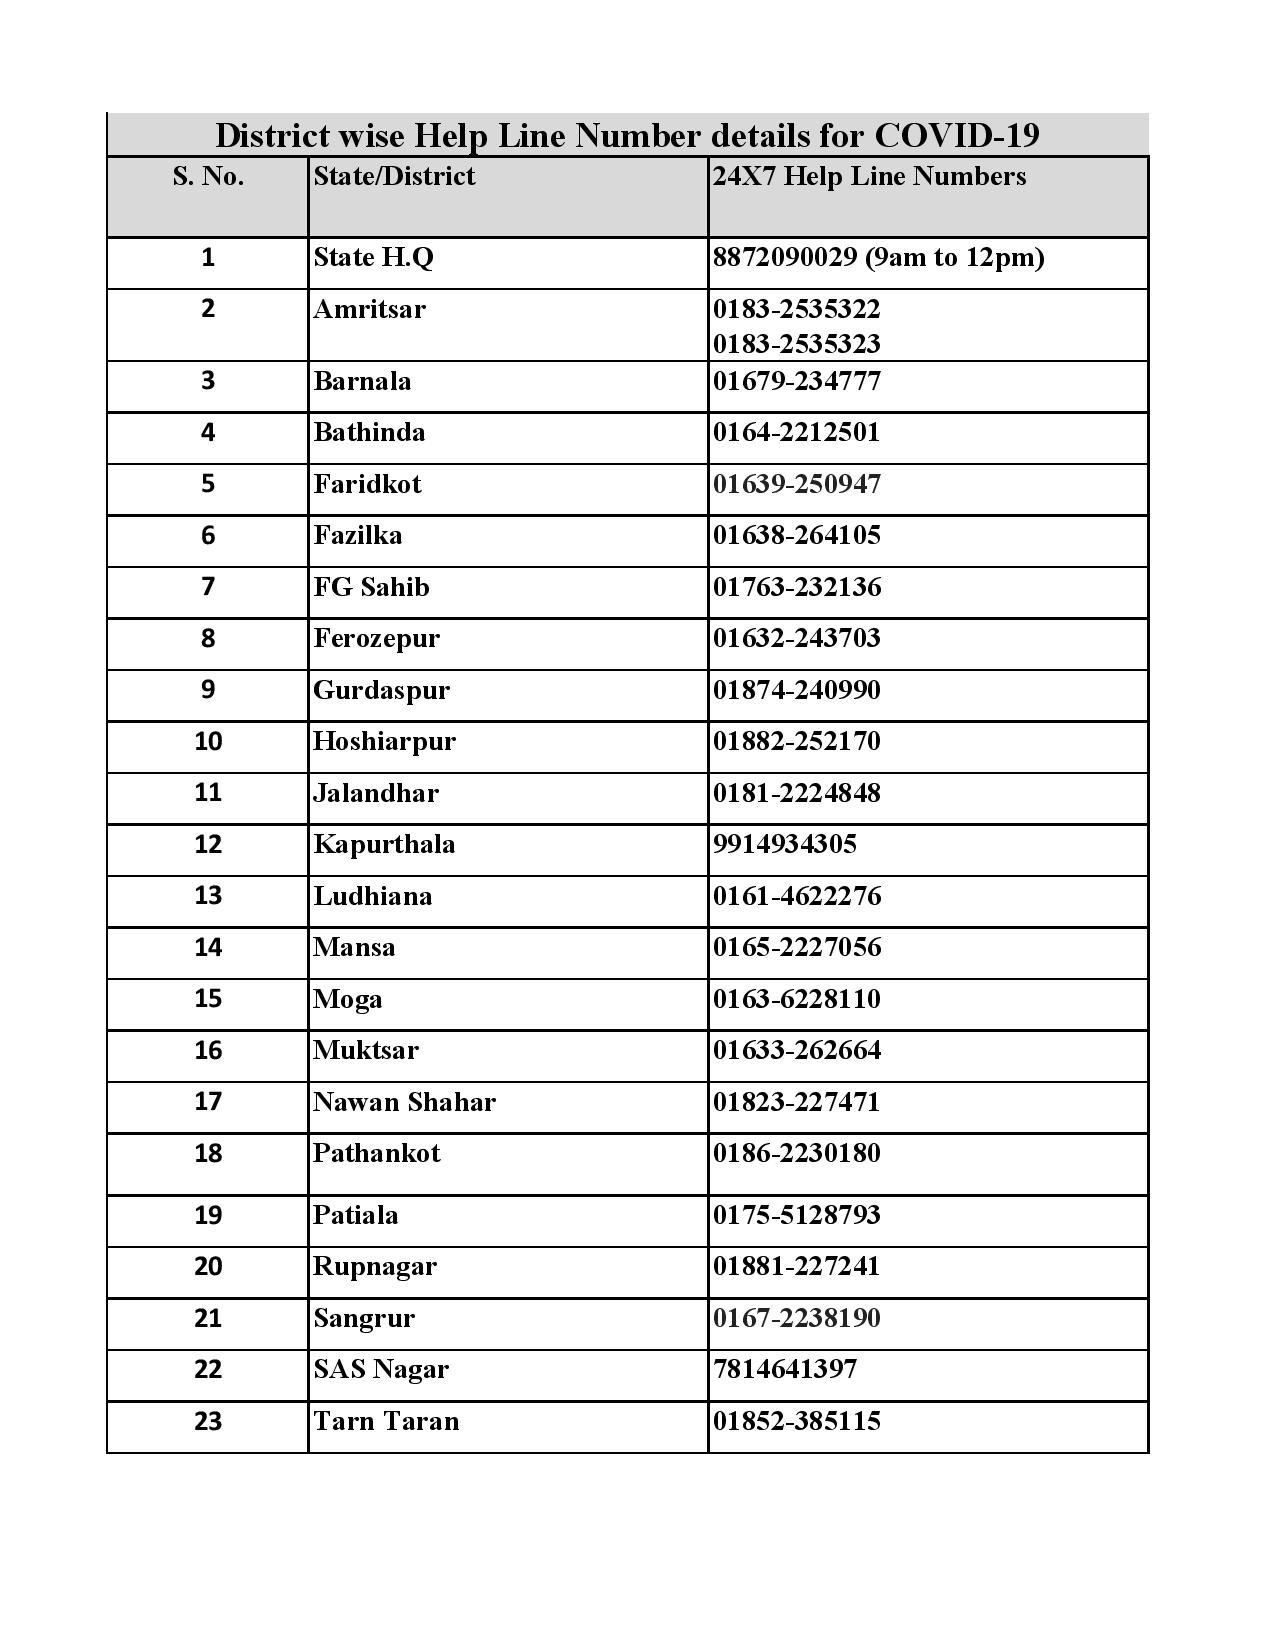 Punjab government has released the help line numbers for all the districts of Punjab